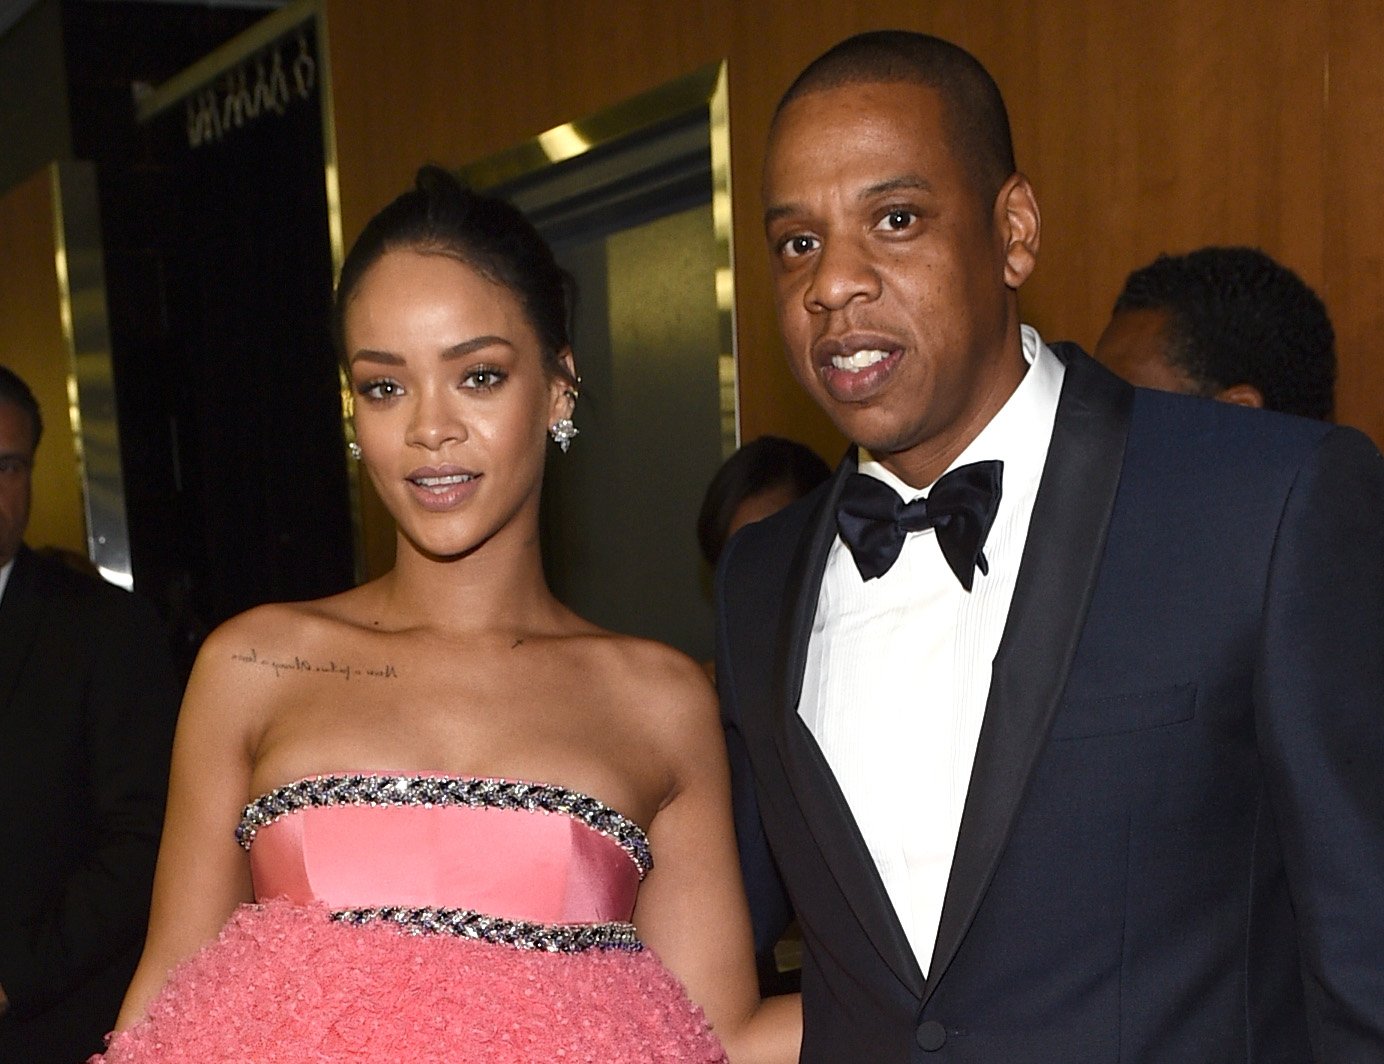 Rihanna and Jay-Z at the 57th Annual Grammy Awards in February 2015. | Photo: Getty Images